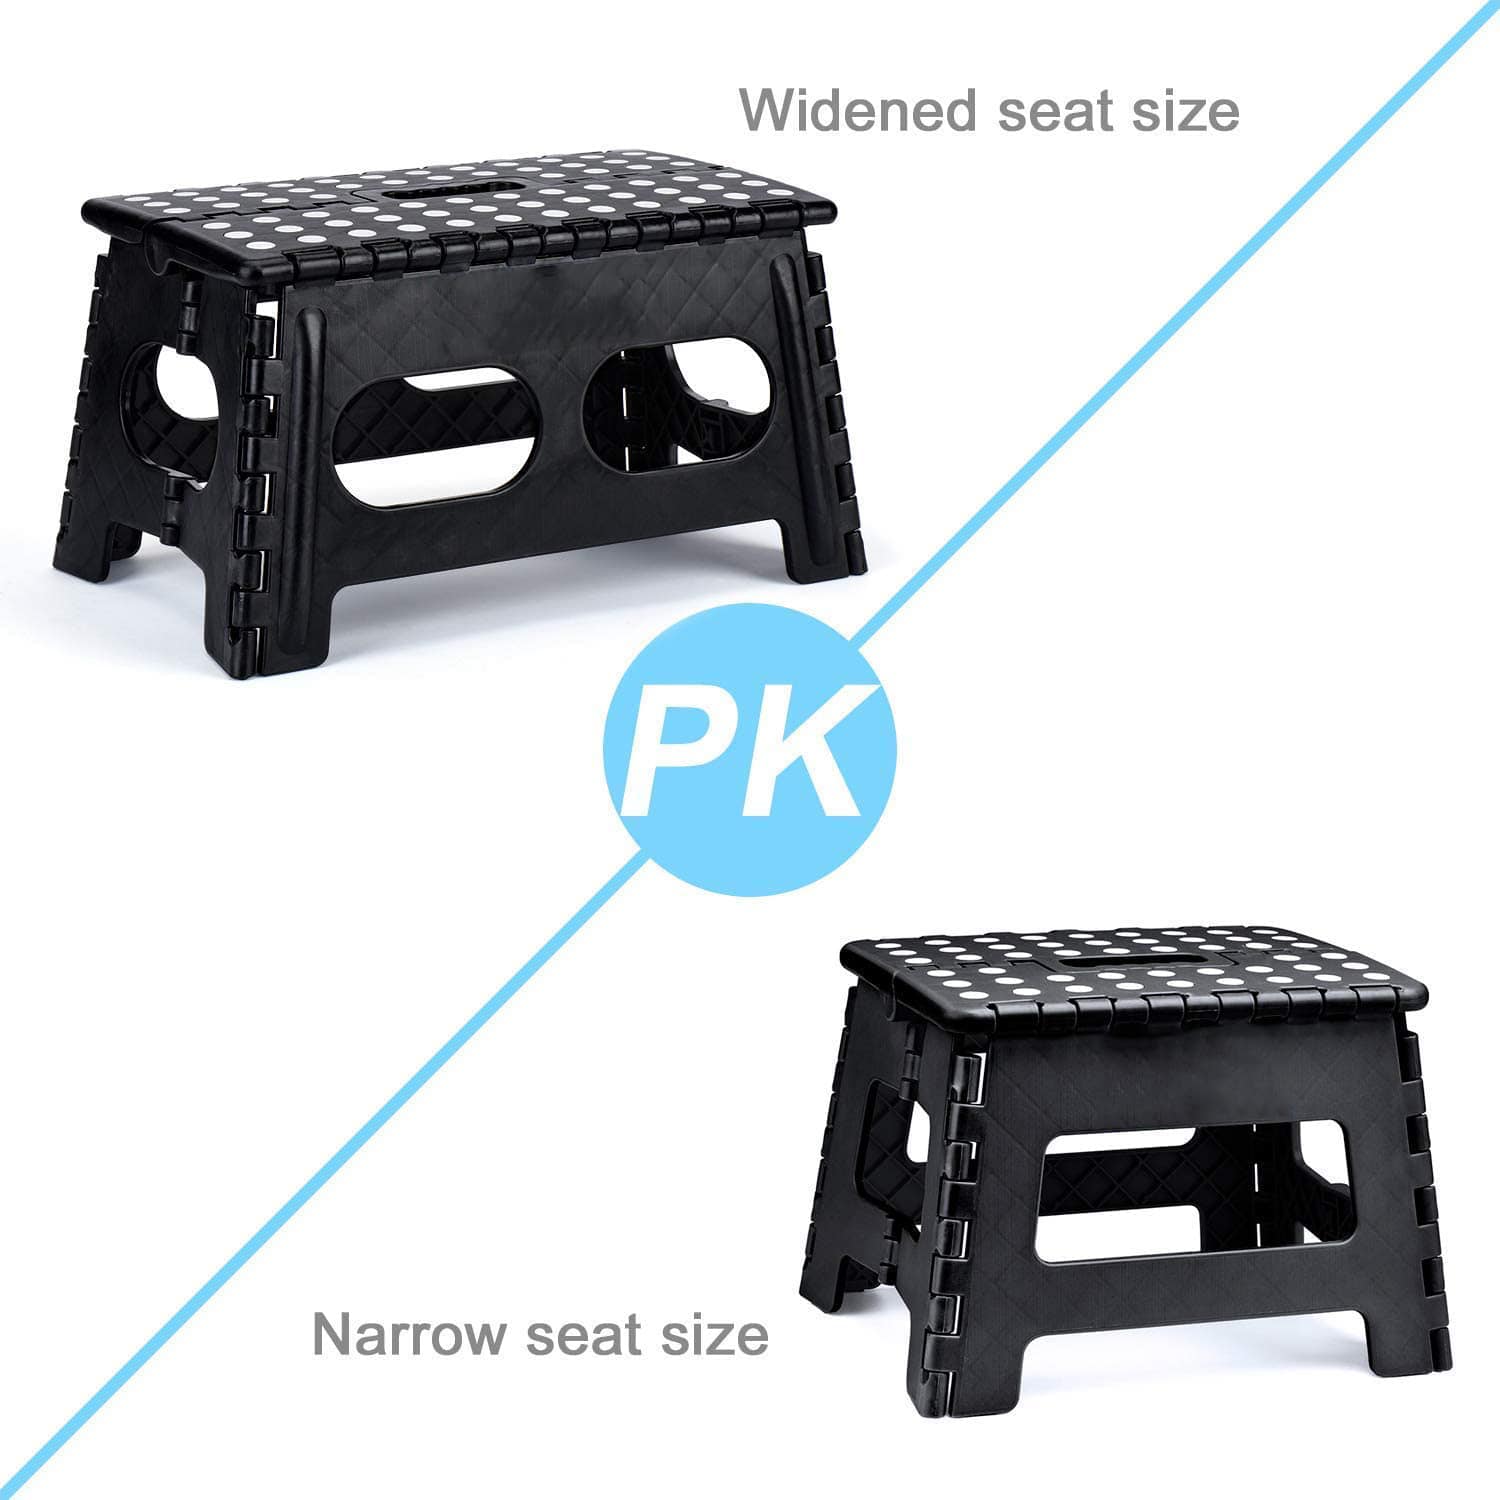 Plastic Extra-Wide household Kitchen Step Stool 8.7 inch height - 1